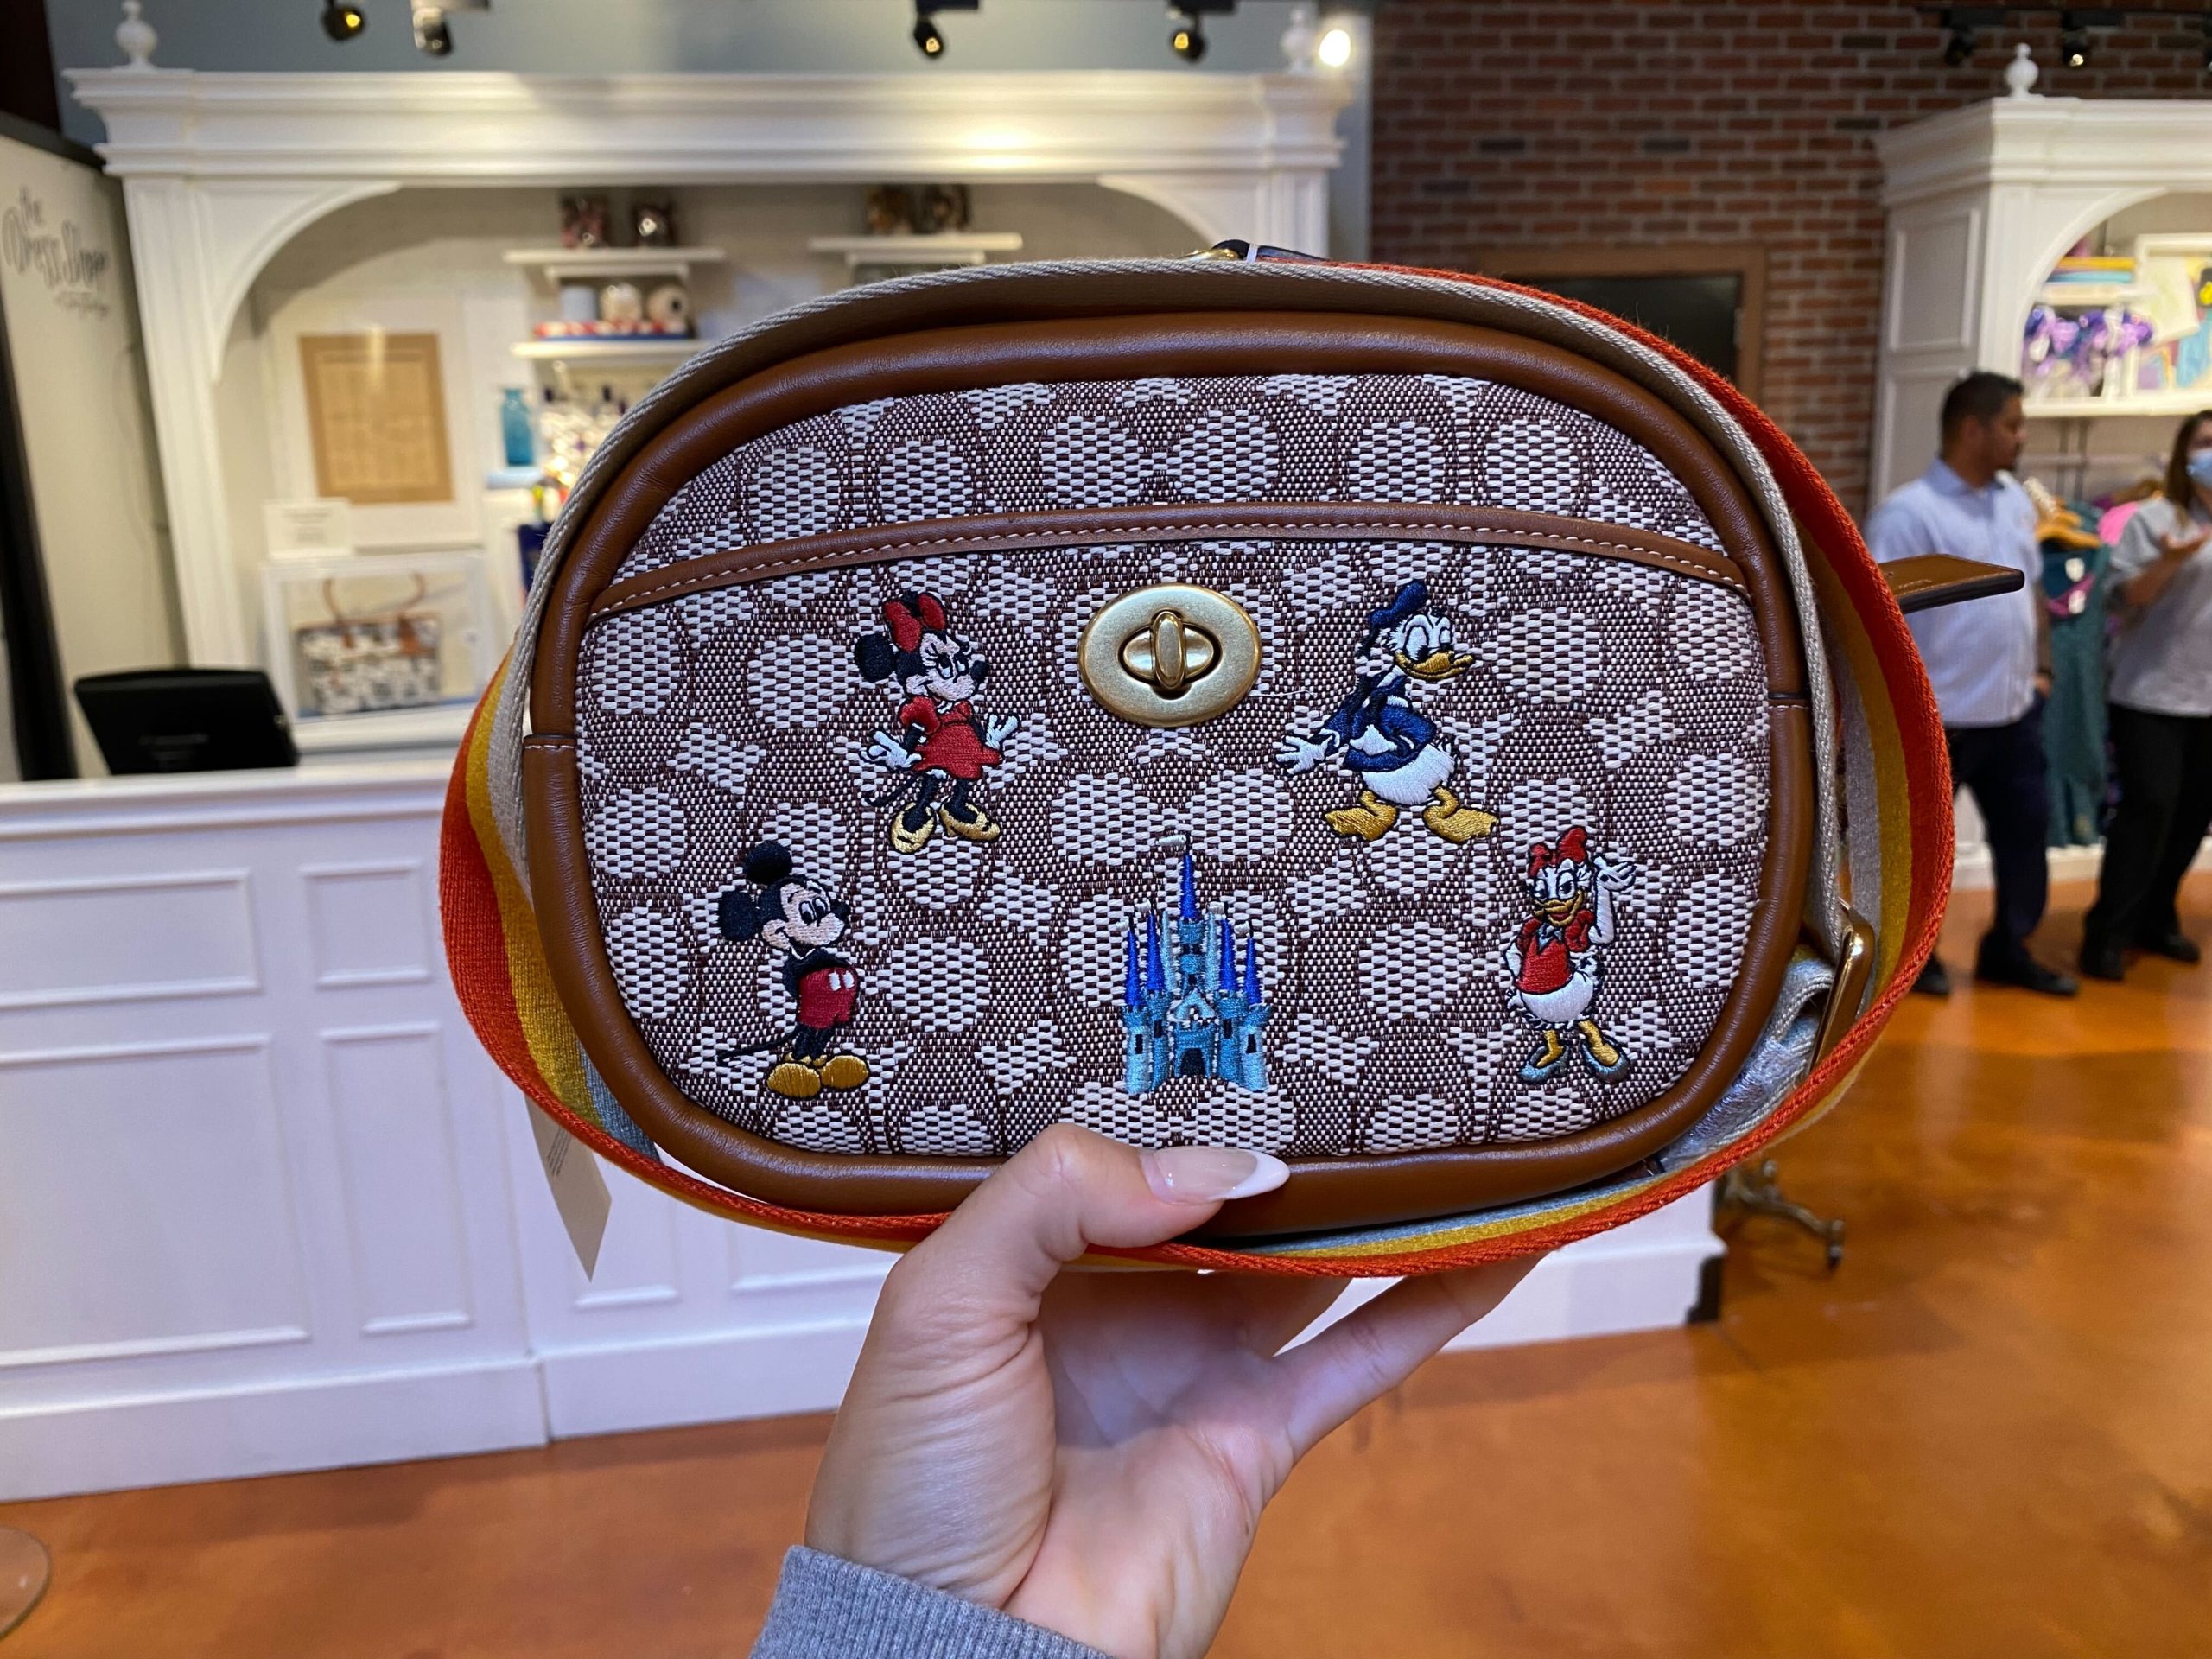 New 50th Anniversary Coach x Disney Apparel and Bag Collection Debuts